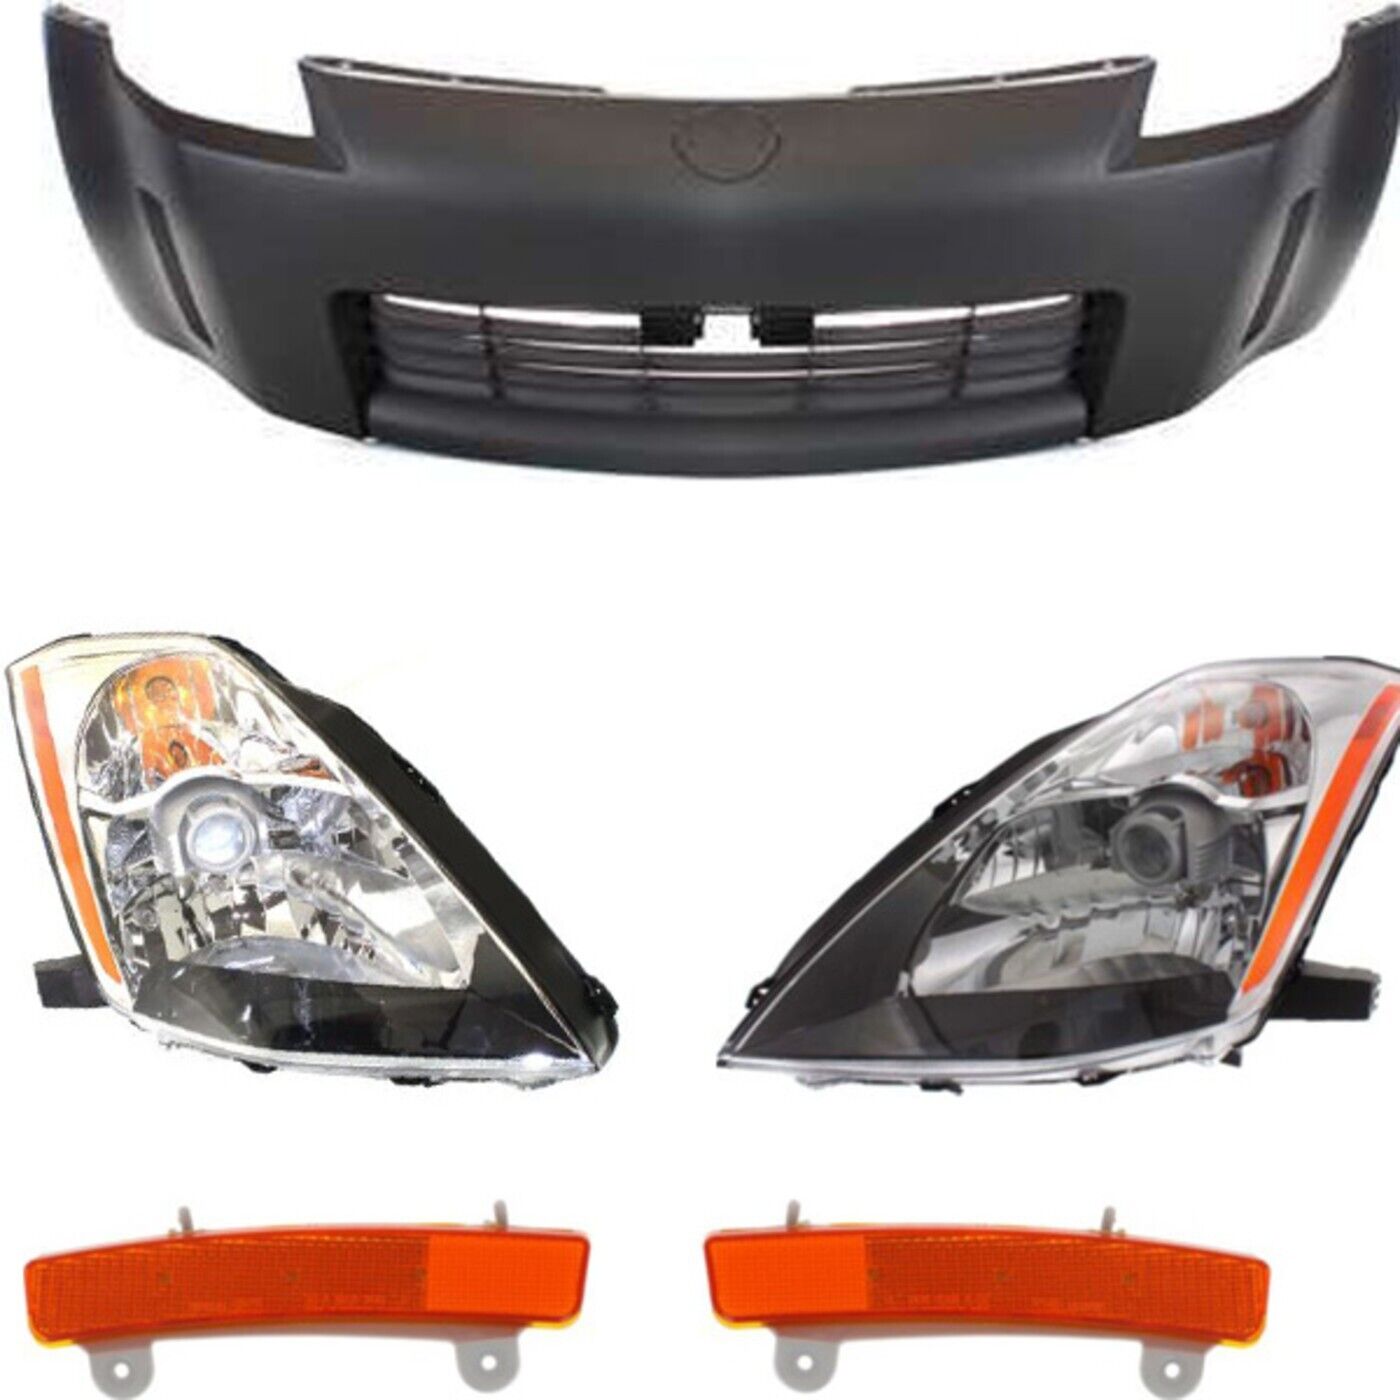 Bumper Cover Fascia Kit Front For Nissan 350Z 2003-2005